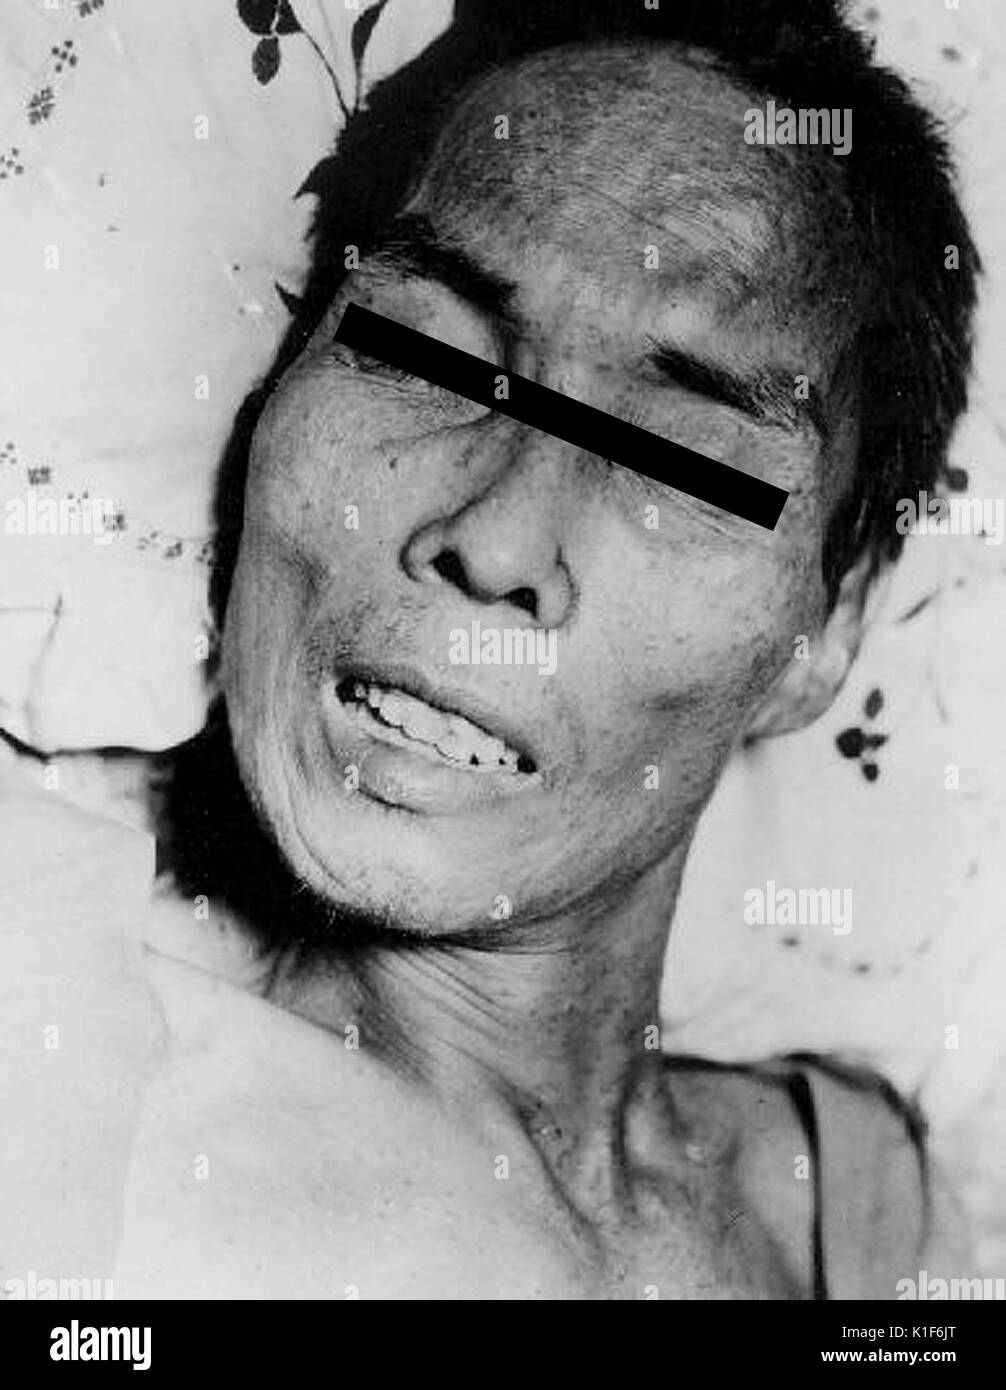 Face of man with tetanus. Tetanus in a 46-year-old man, Manila. Muscular spasms, abdomen and limbs, from tetanus due to shell fragments wound on hand. Image courtesy CDC/AFIP/C. Farmer, 1965. Stock Photo